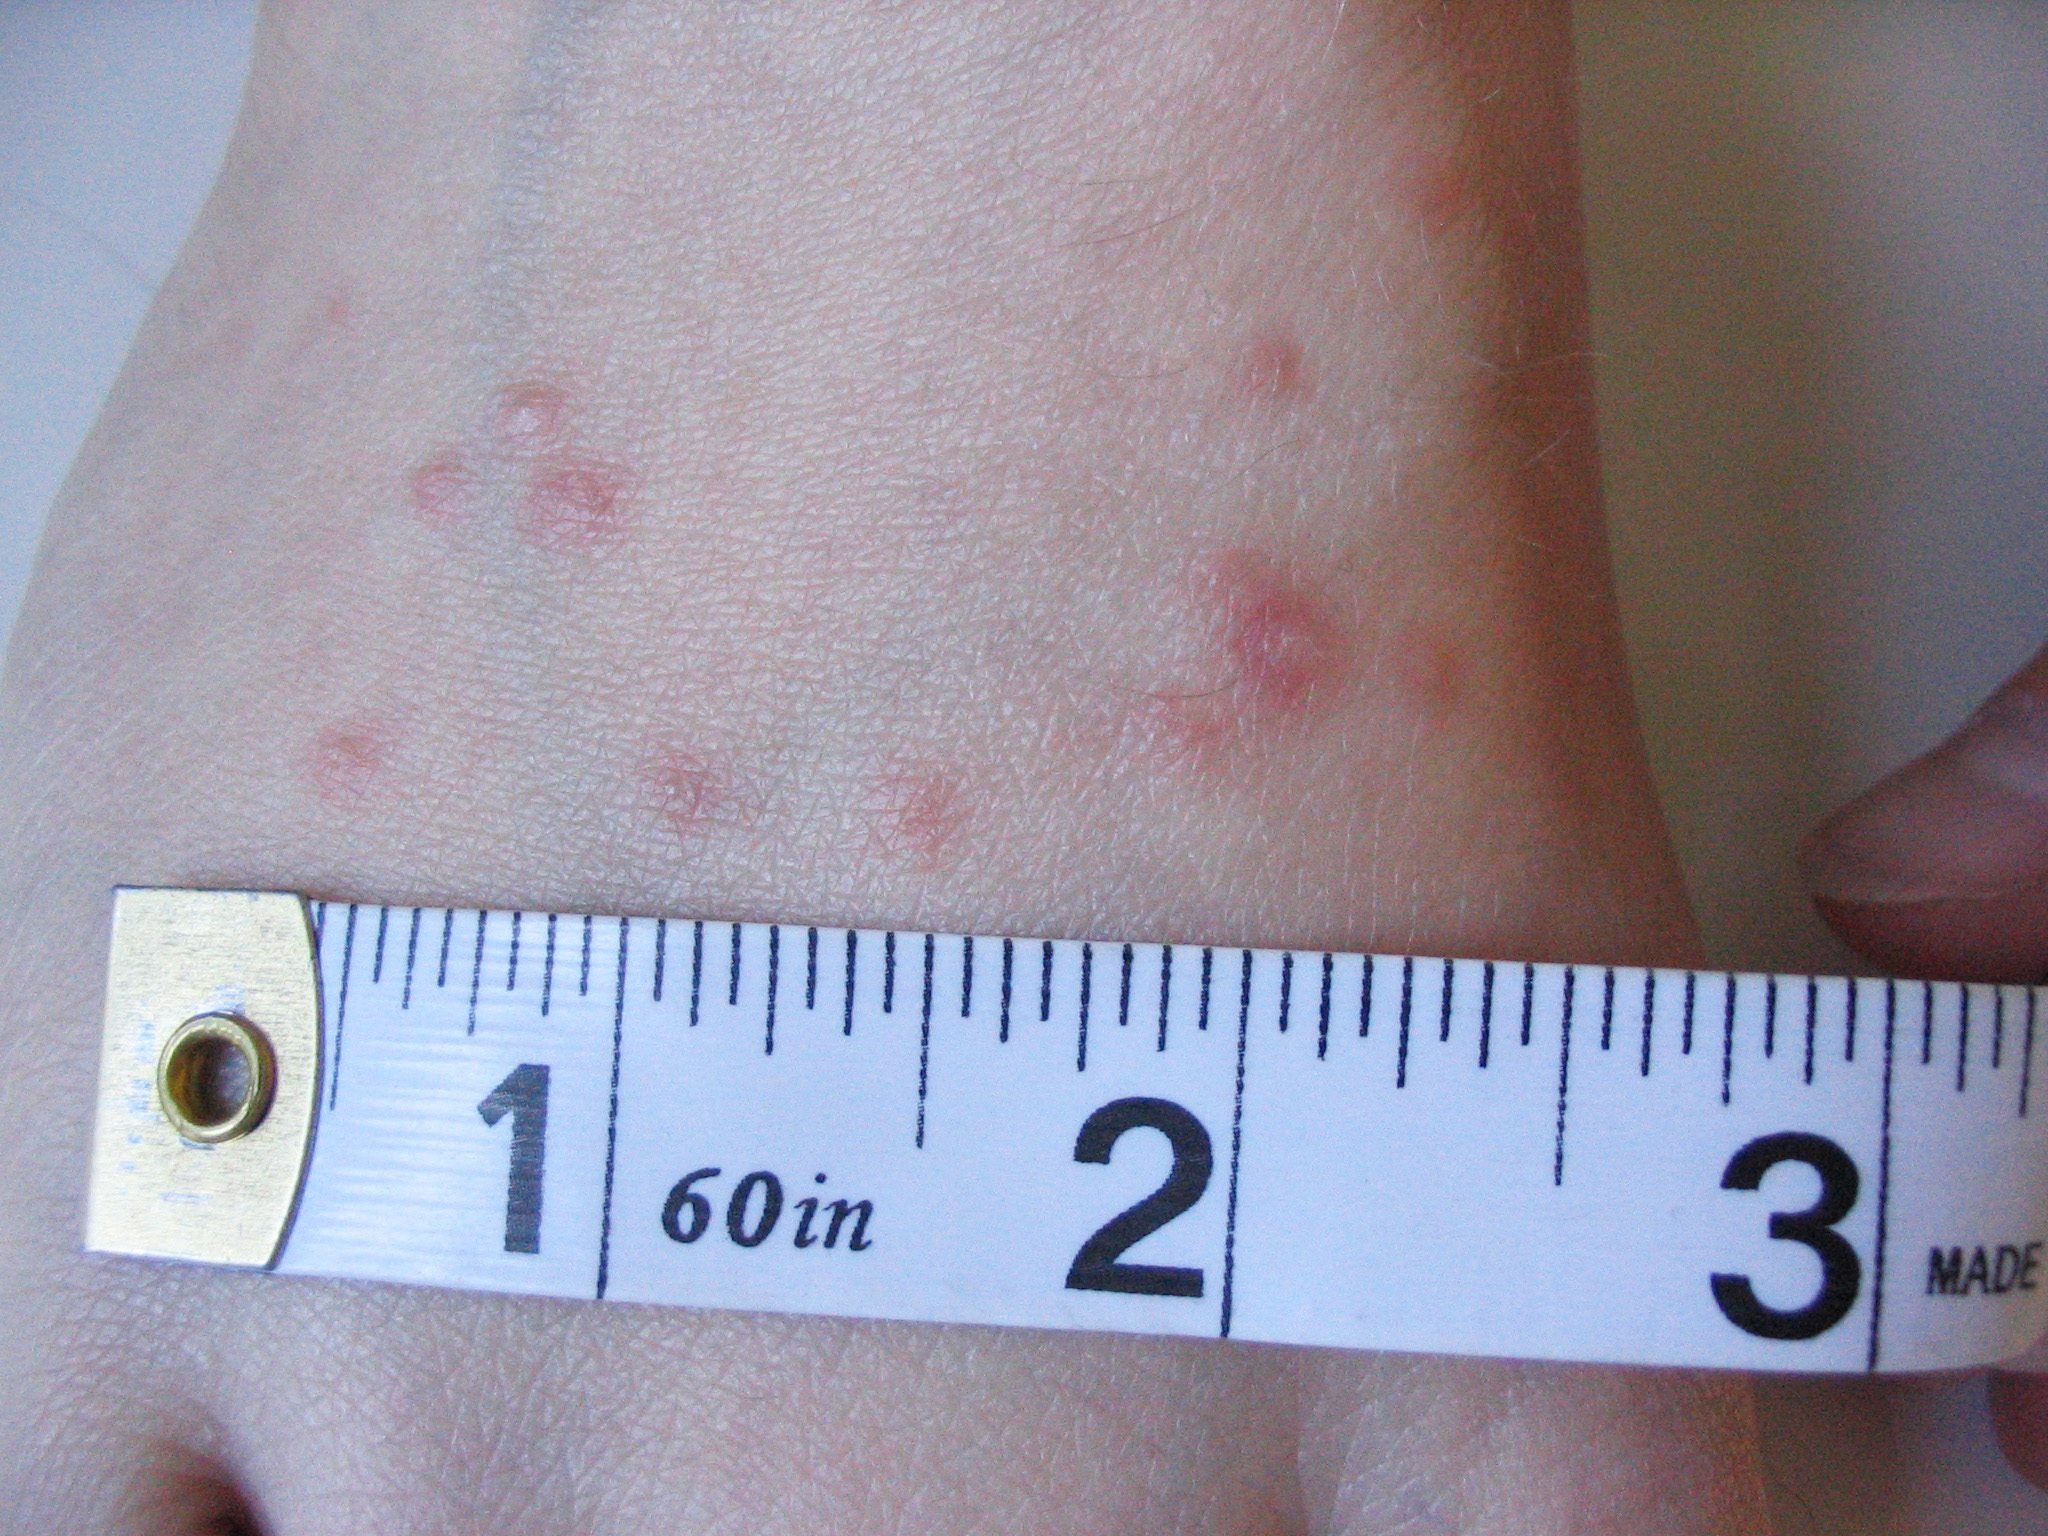 Chigger Bites: What They Look Like, Prevention, Treatment